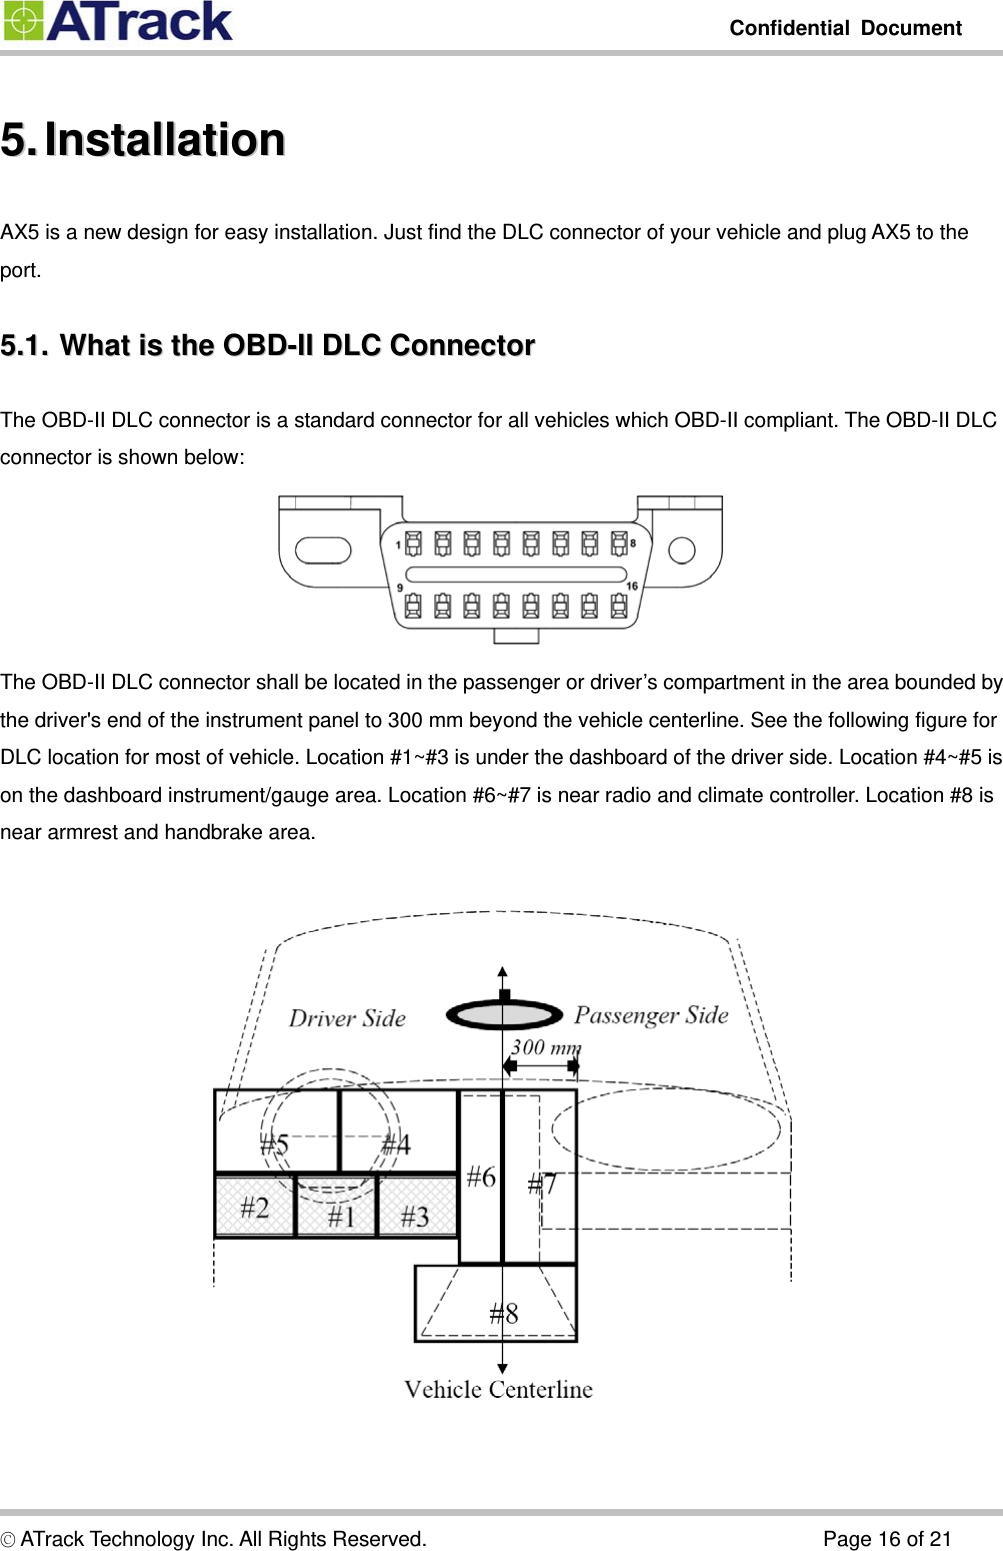         Confidential Document  5.5.  Installation  InstallationAX5 is a new design for easy installation. Just find the DLC connector of your vehicle and plug AX5 to the port. 5.1.5.1.  What  is  the  OBD-II  DLC  Connector  What is the OBD-II DLC ConnectorThe OBD-II DLC connector is a standard connector for all vehicles which OBD-II compliant. The OBD-II DLC connector is shown below:  The OBD-II DLC connector shall be located in the passenger or driver’s compartment in the area bounded by the driver&apos;s end of the instrument panel to 300 mm beyond the vehicle centerline. See the following figure for DLC location for most of vehicle. Location #1~#3 is under the dashboard of the driver side. Location #4~#5 is on the dashboard instrument/gauge area. Location #6~#7 is near radio and climate controller. Location #8 is near armrest and handbrake area.    © ATrack Technology Inc. All Rights Reserved.                                      Page 16 of 21 